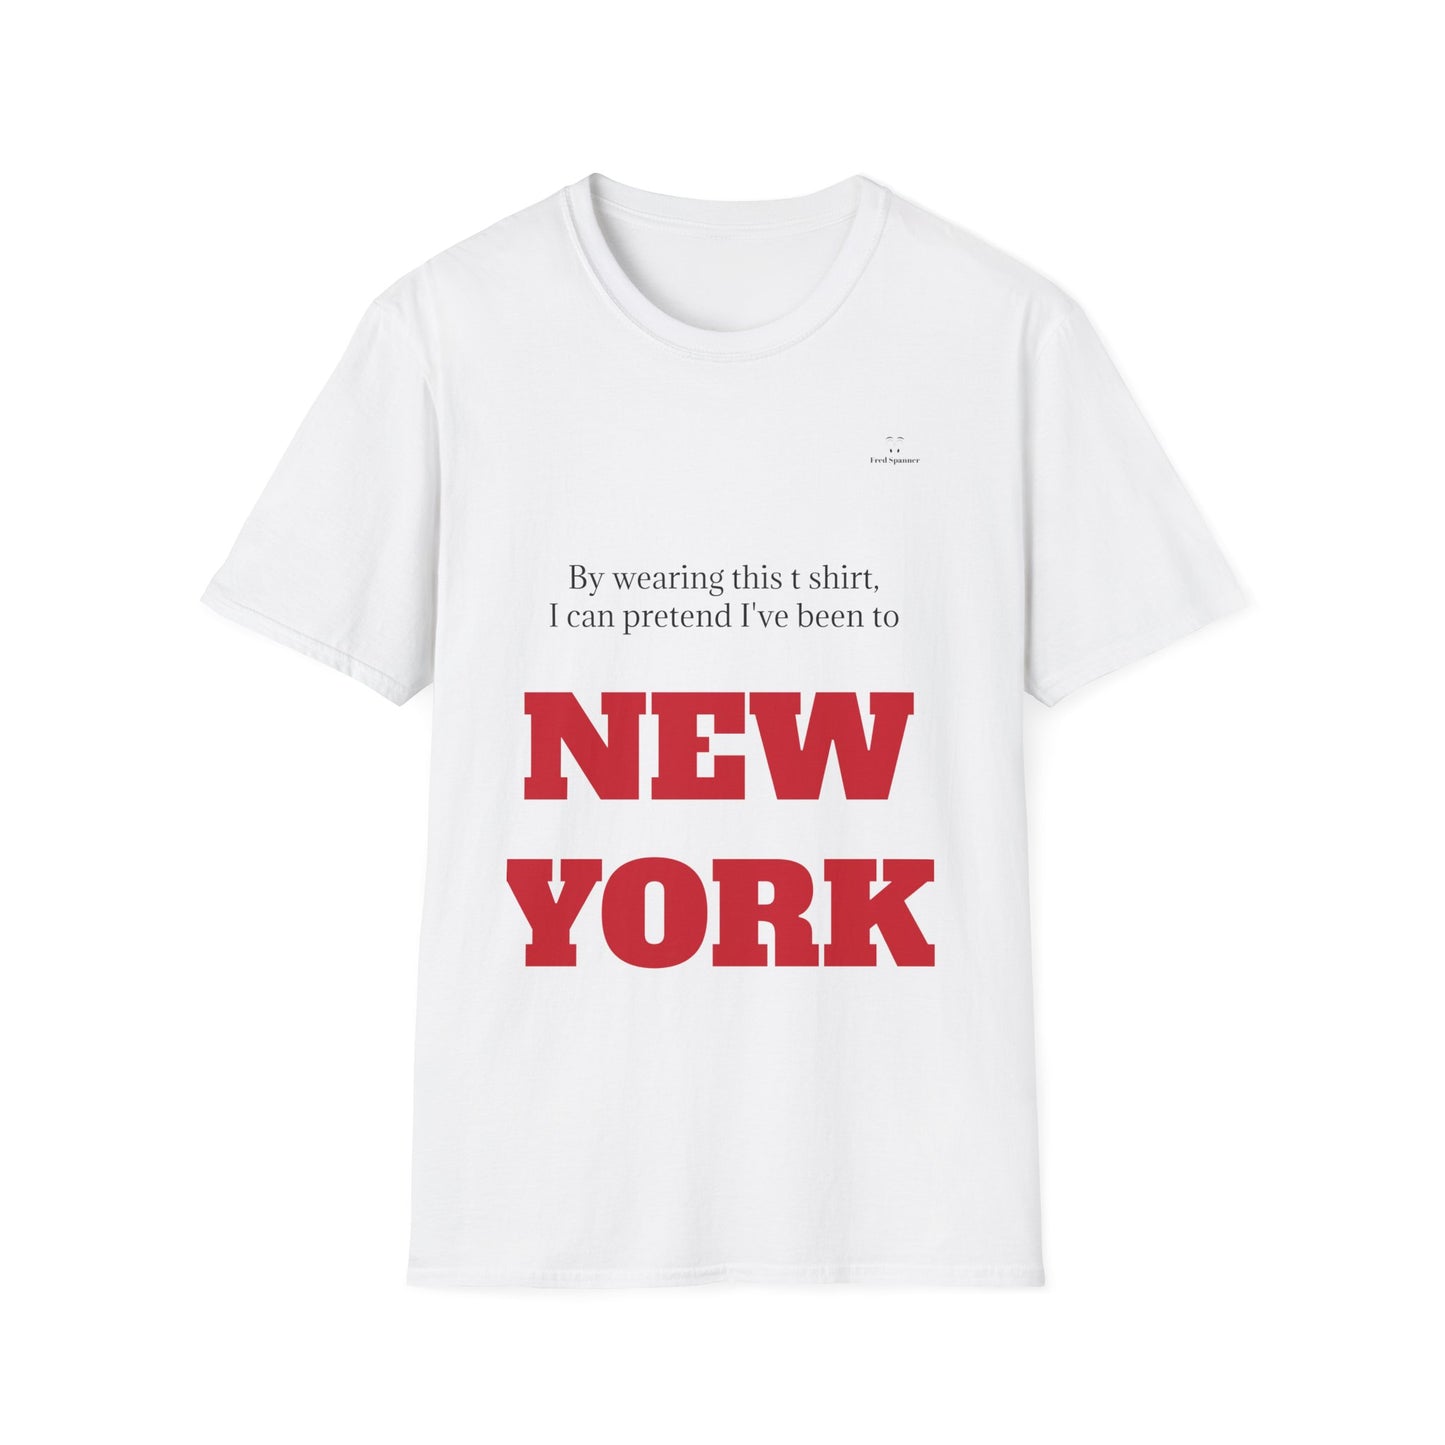 Never been to New York t shirt